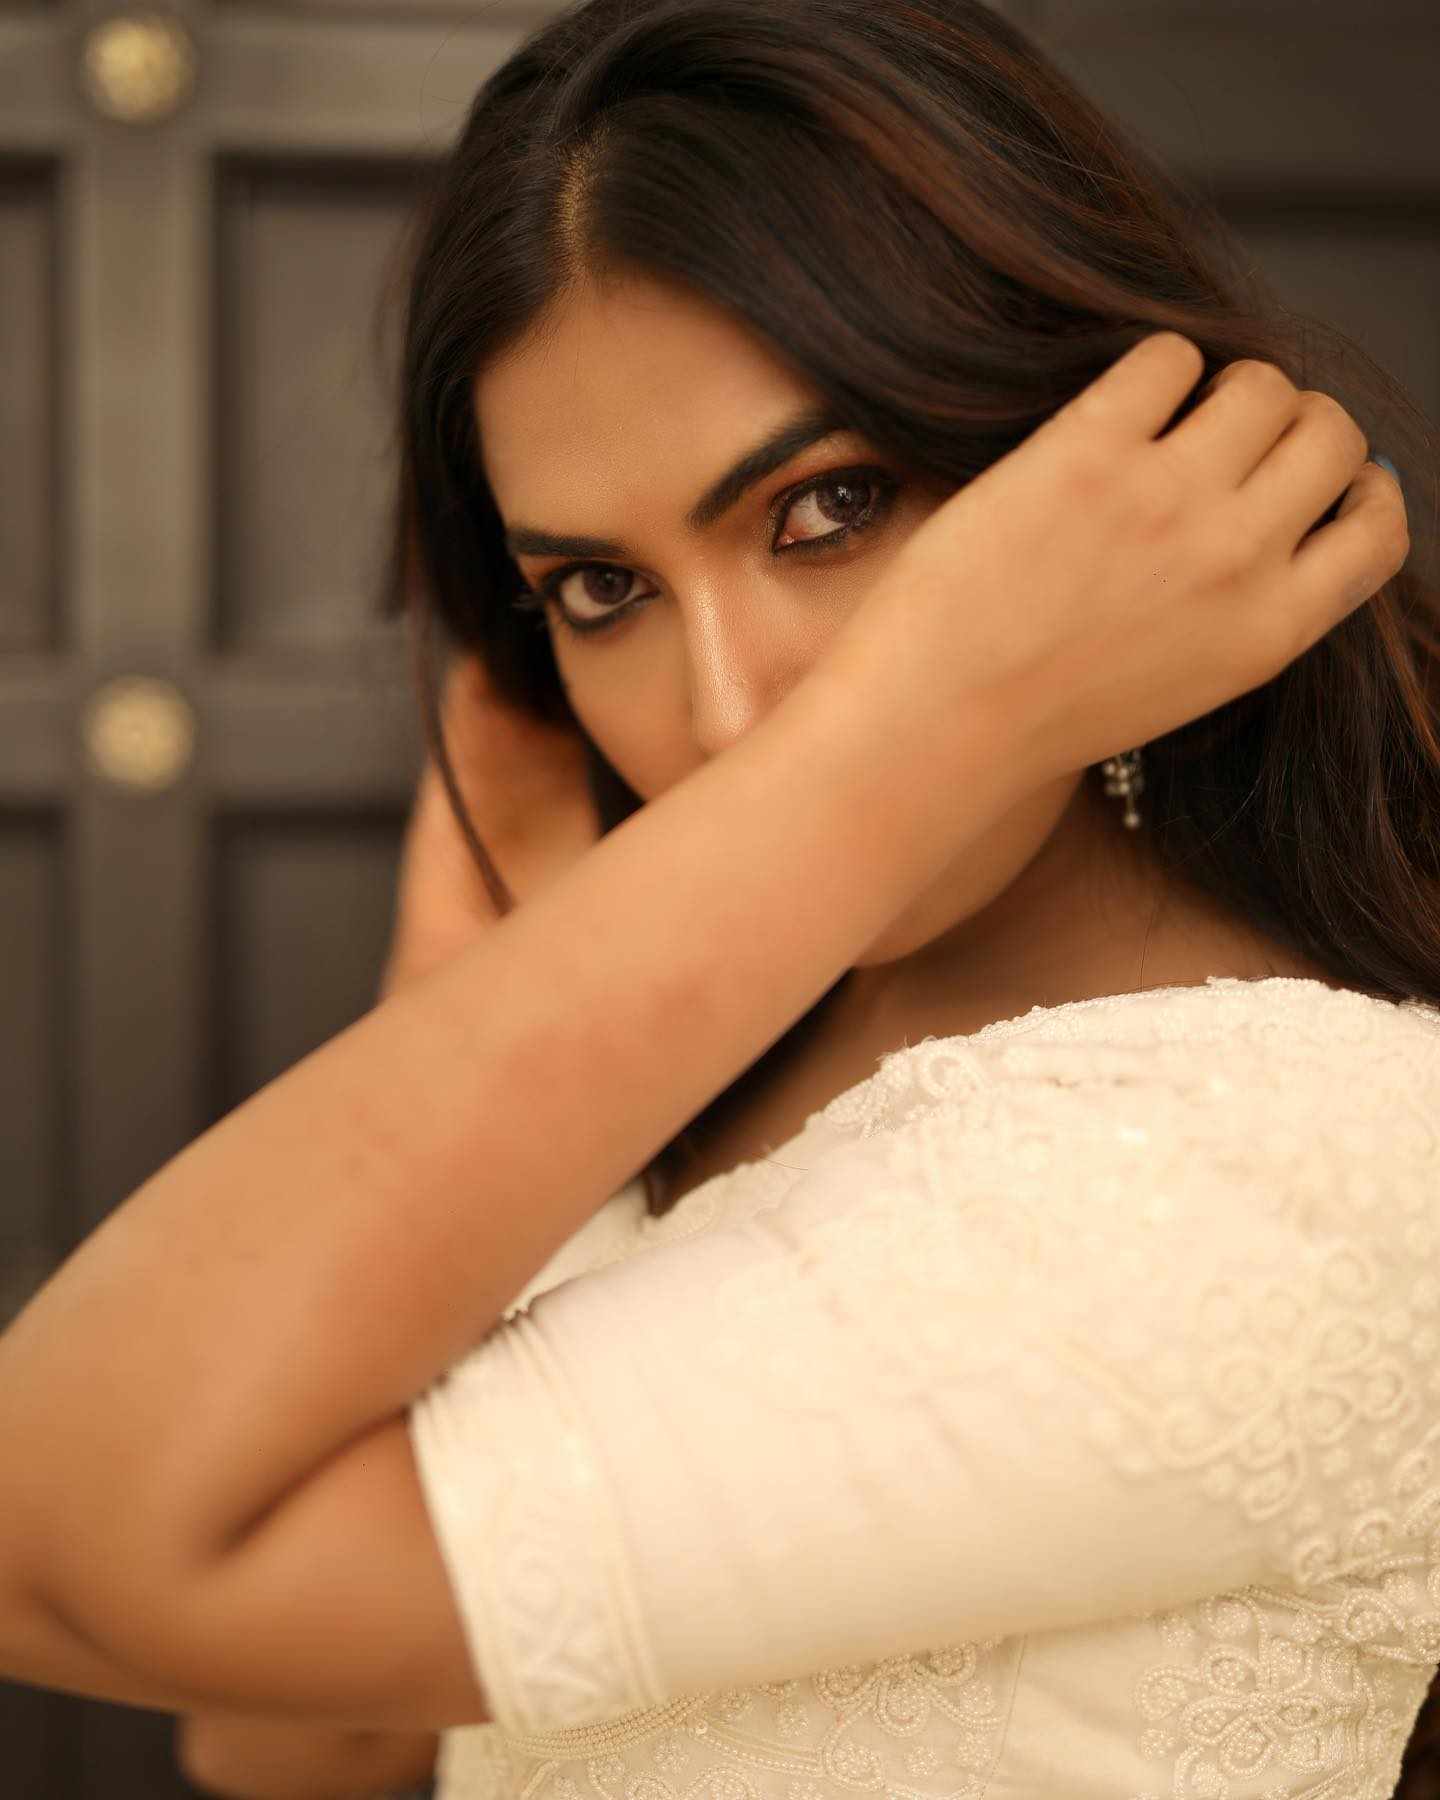 Divi Vadthya latest photoshoot in white dress